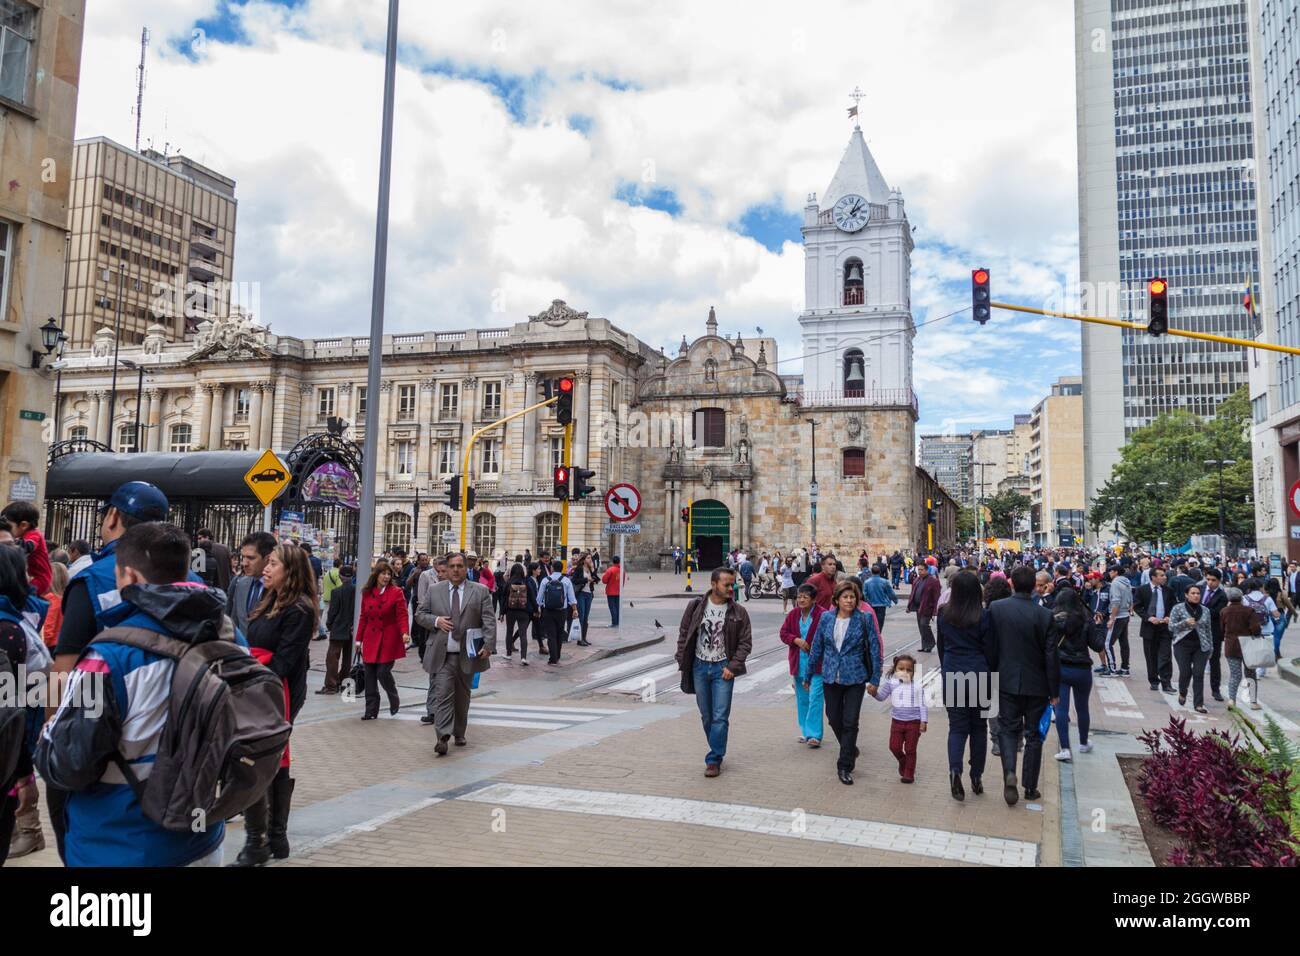 BOGOTA, COLOMBIA - SEPTEMBER 24, 2015: People walk on a pedestrian zone on  Carrera 7 street in Bogota, capital of Colombia Stock Photo - Alamy